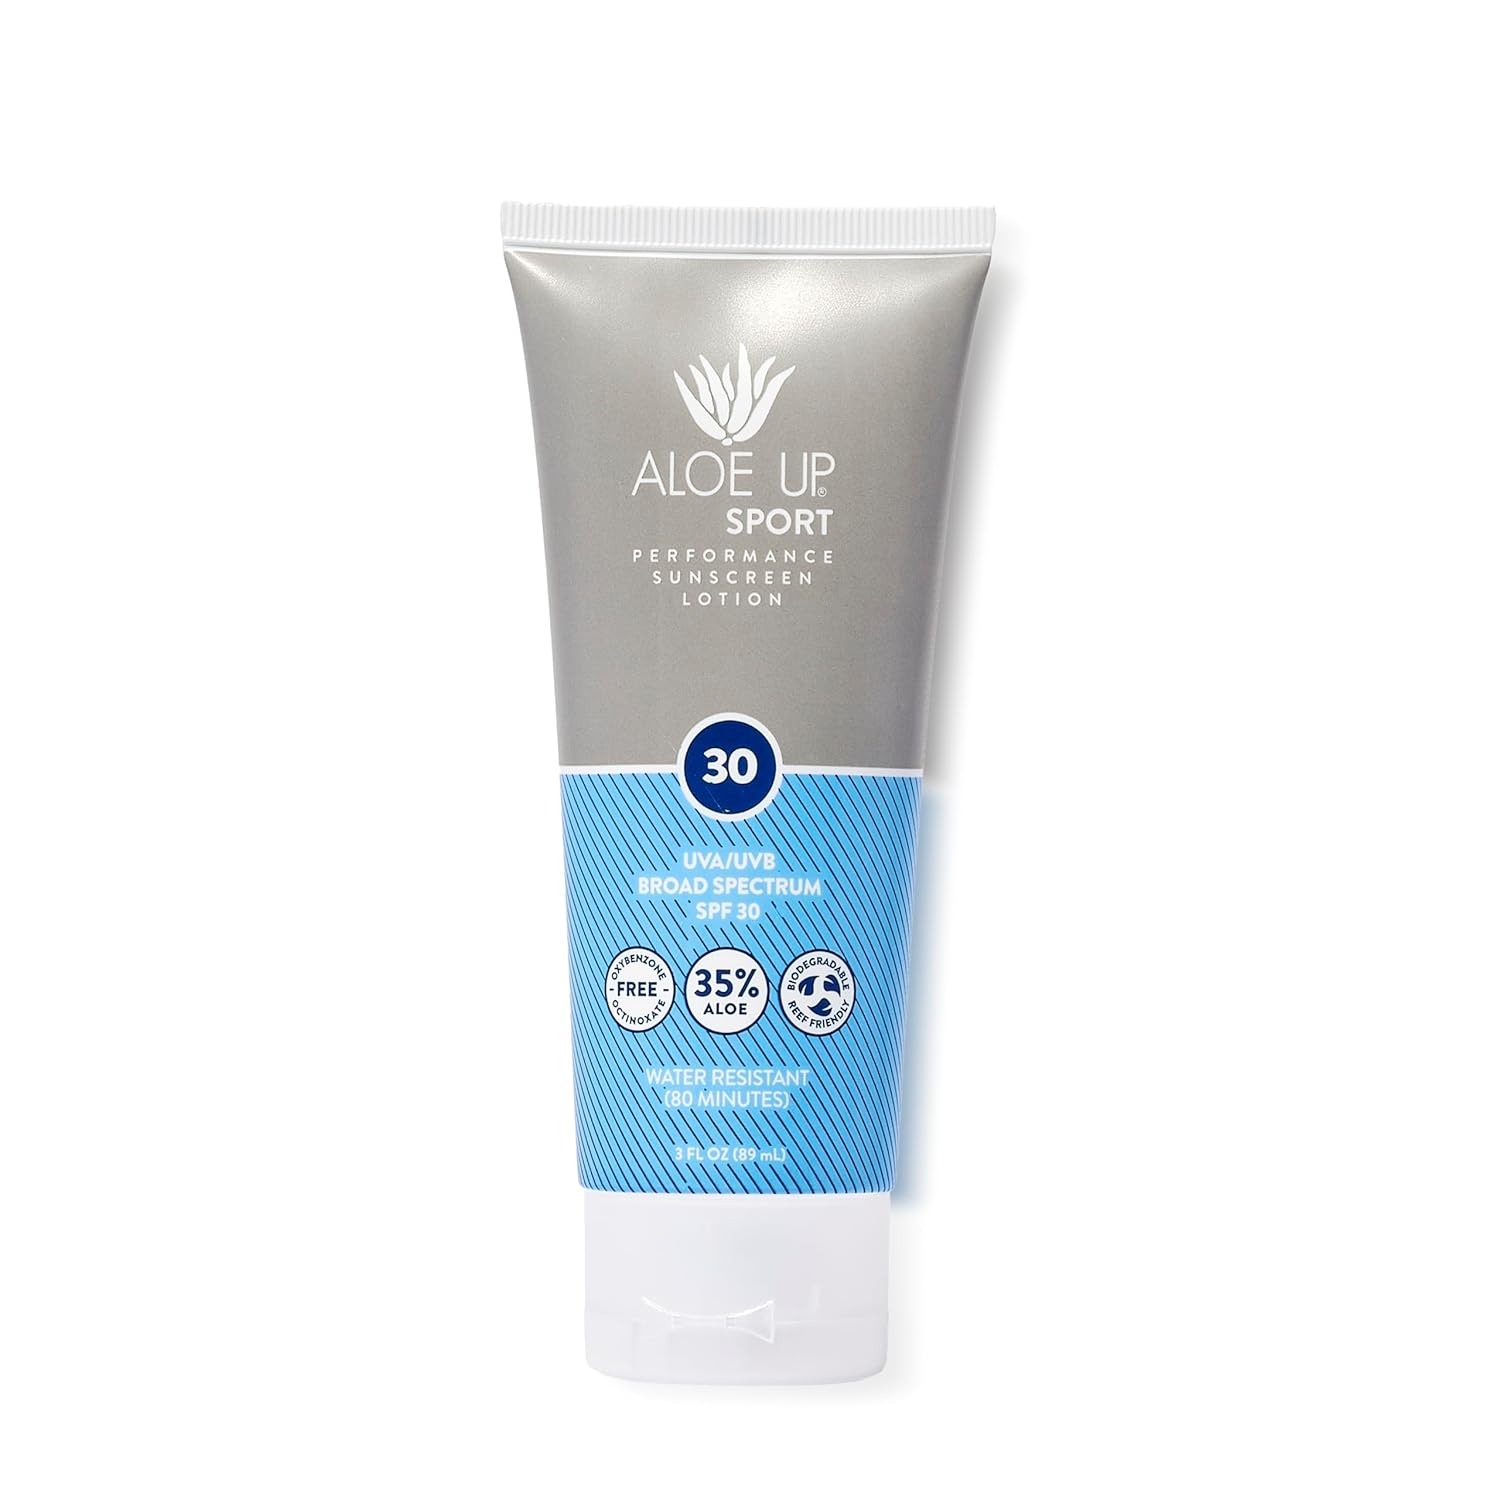 Aloe Up Sport Sunscreen Lotion SPF 30 - Broad Spectrum UVA/UVB Sunscreen Protector for Face and Body - With Hydrating Aloe Vera Gel - Non-Greasy - No White Cast - Reef Safe - Fragrance-Free - 3 Oz